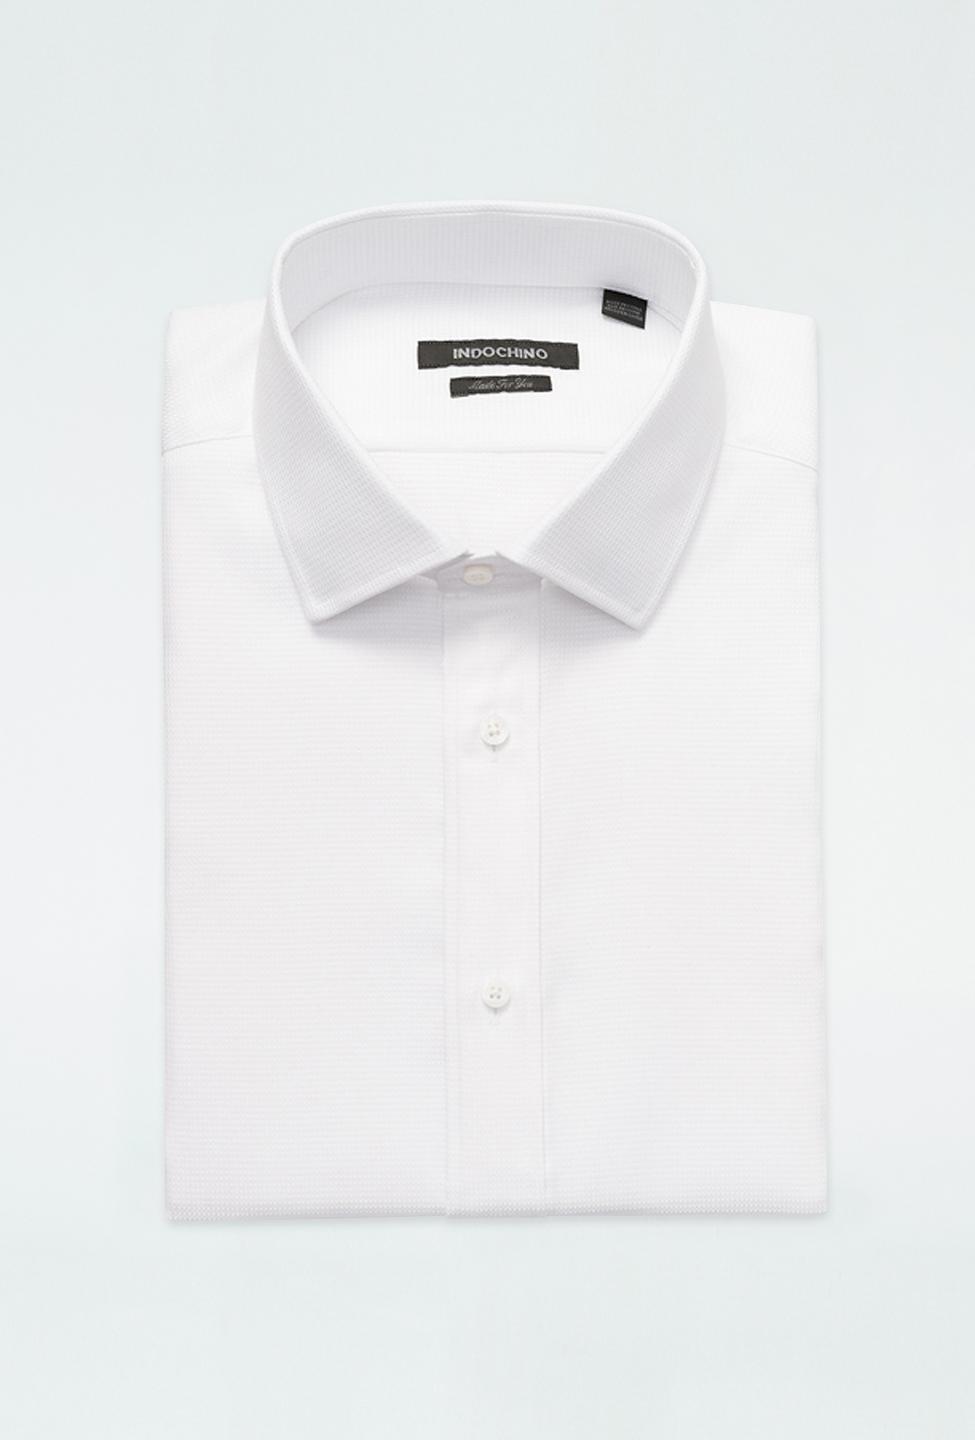 White shirt - Solid Design from Premium Indochino Collection